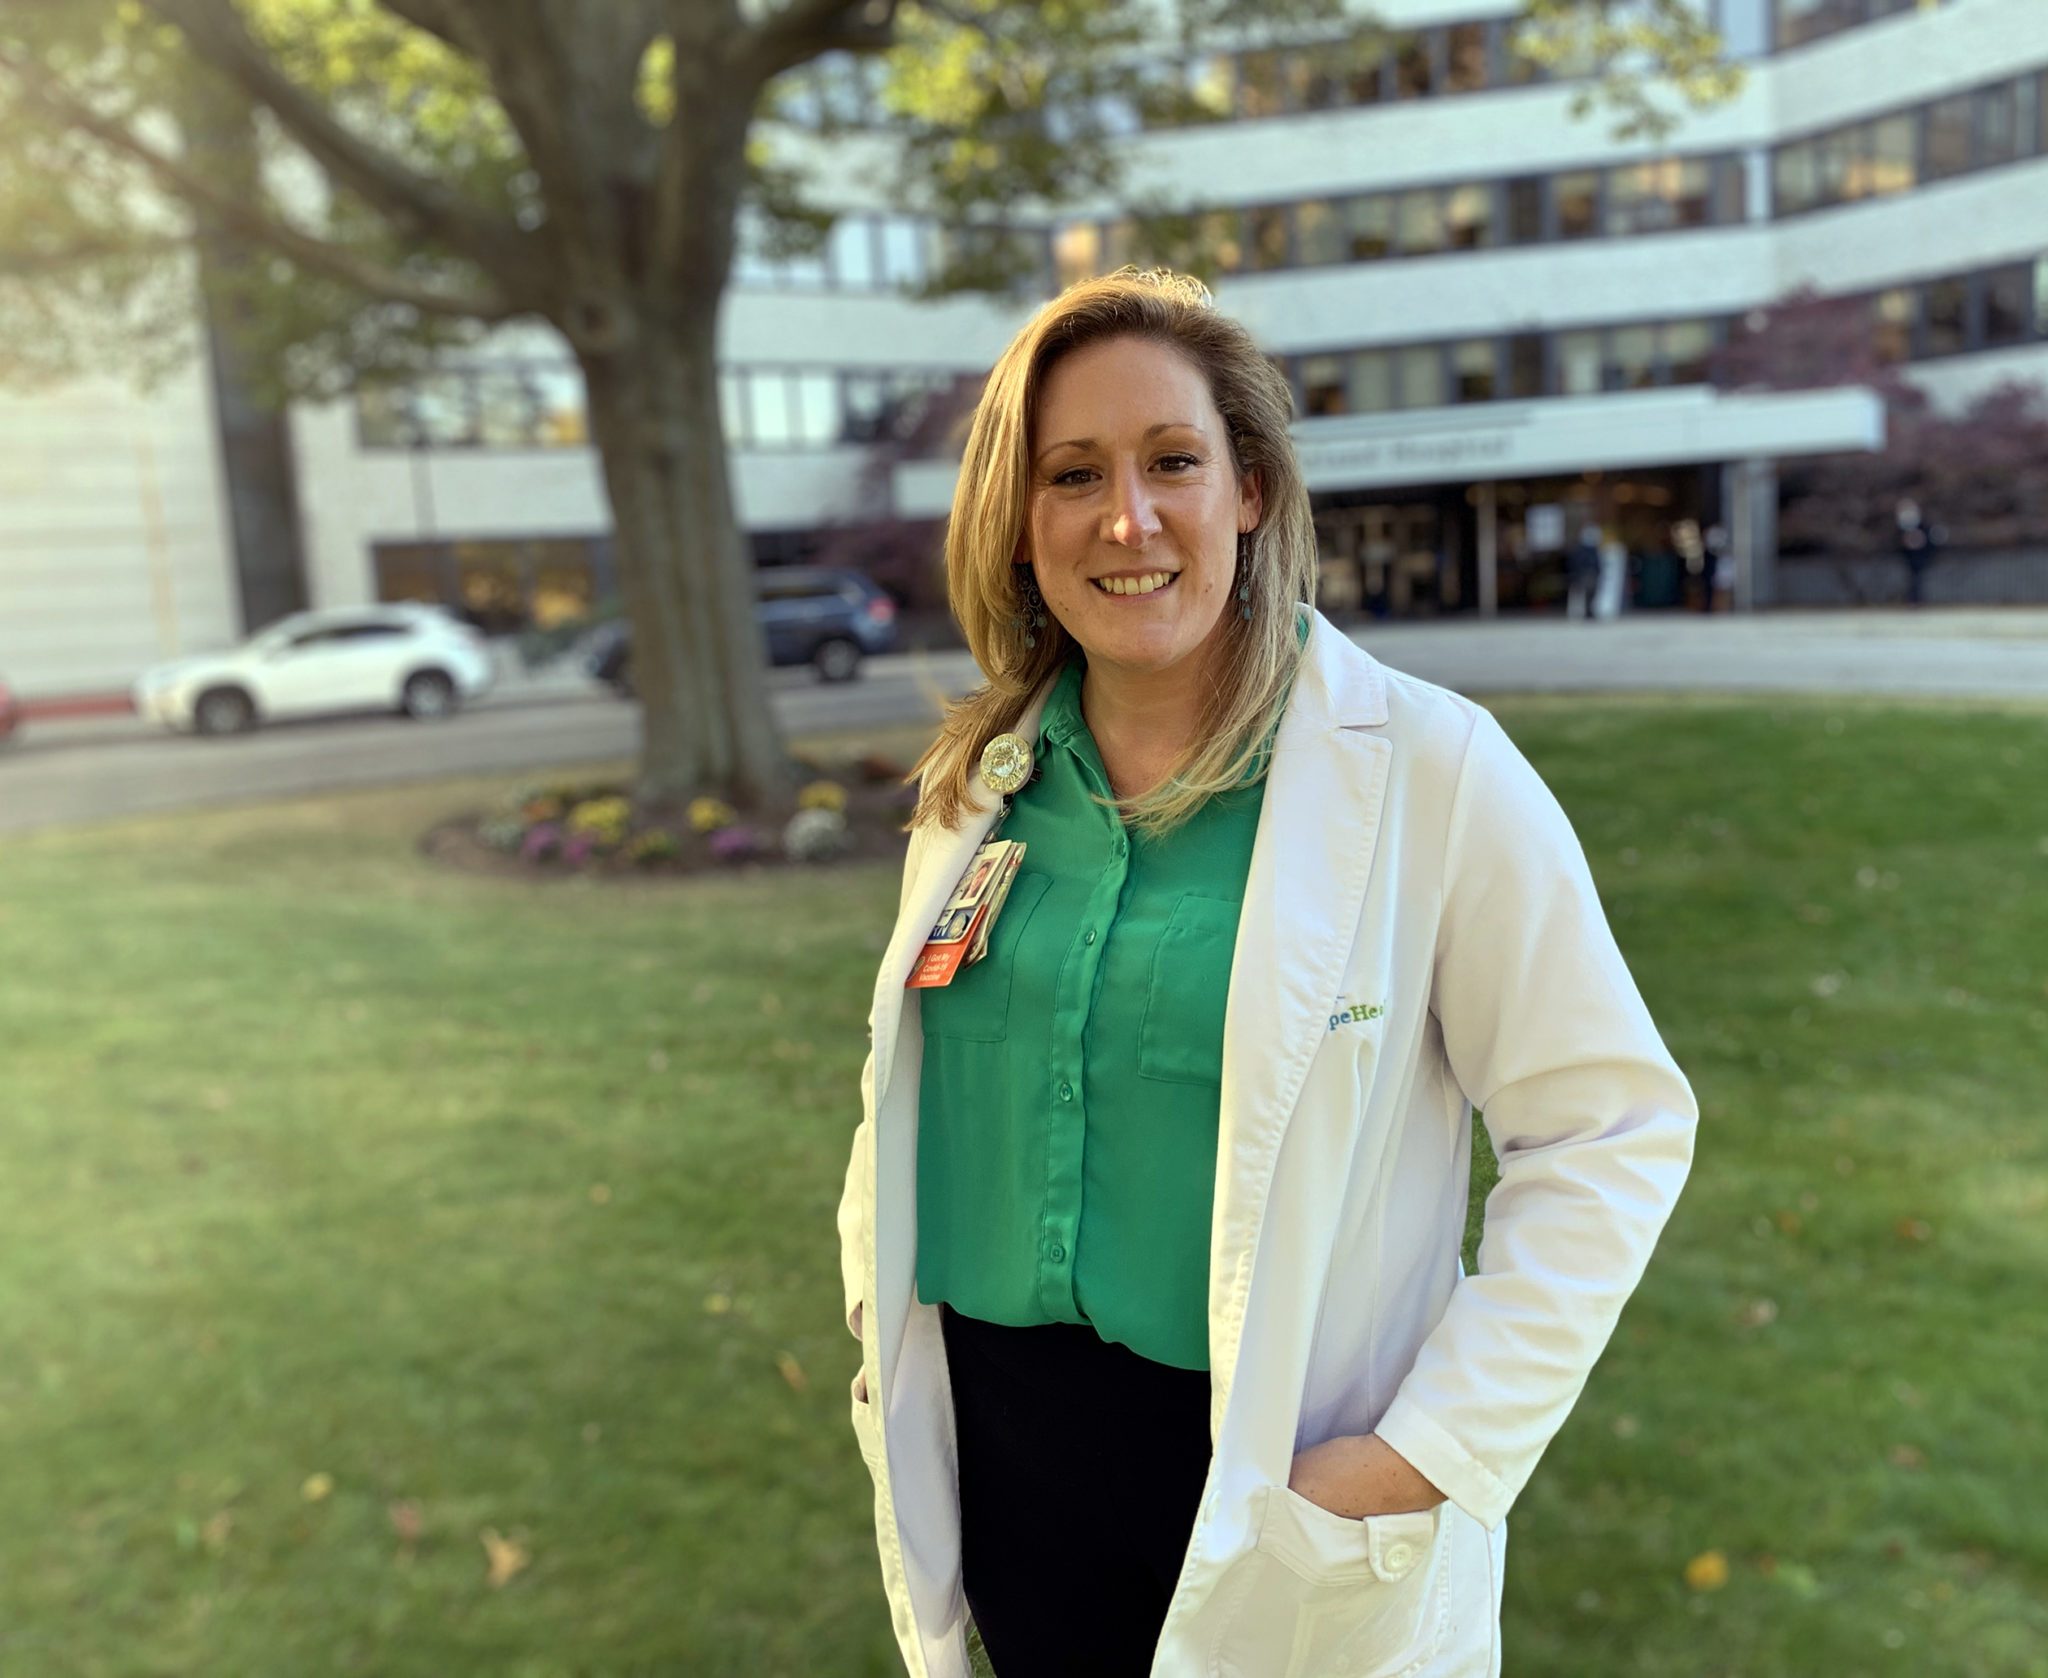 woman in white lab coat standing outside hospital